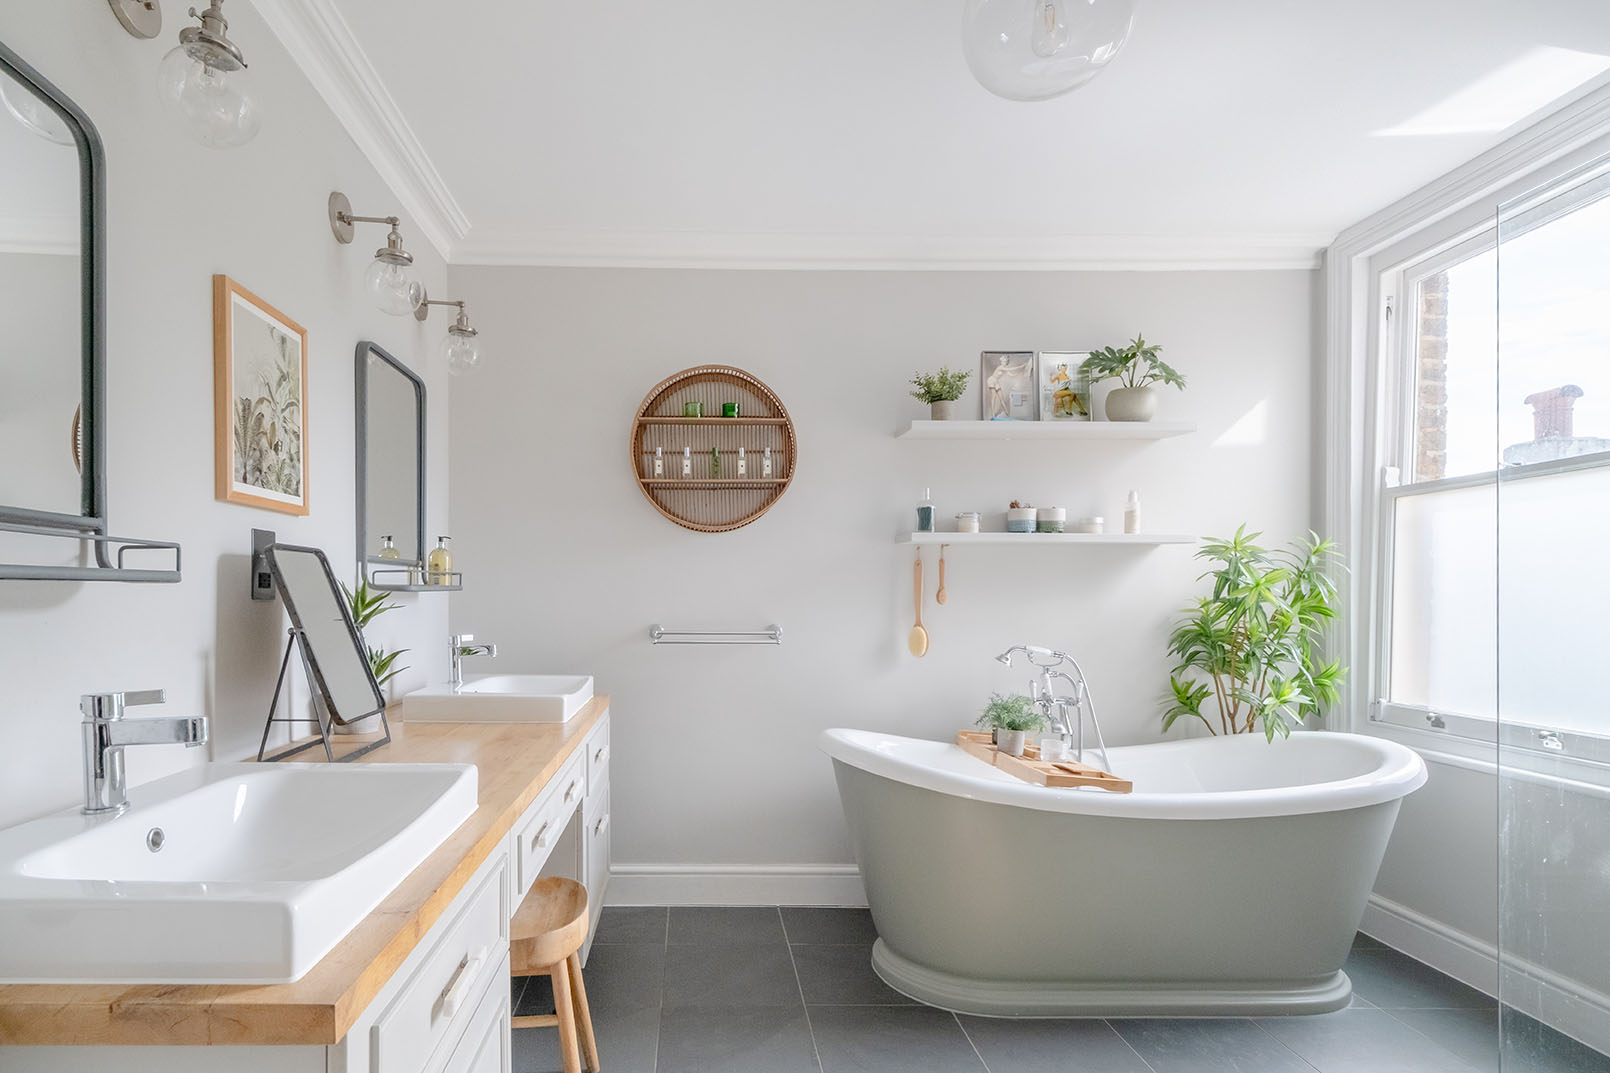 a bathroom photo from a property photography series, natural colours, bright and modern design space, light grey walls, showing the bathtub and partial counter with double sink